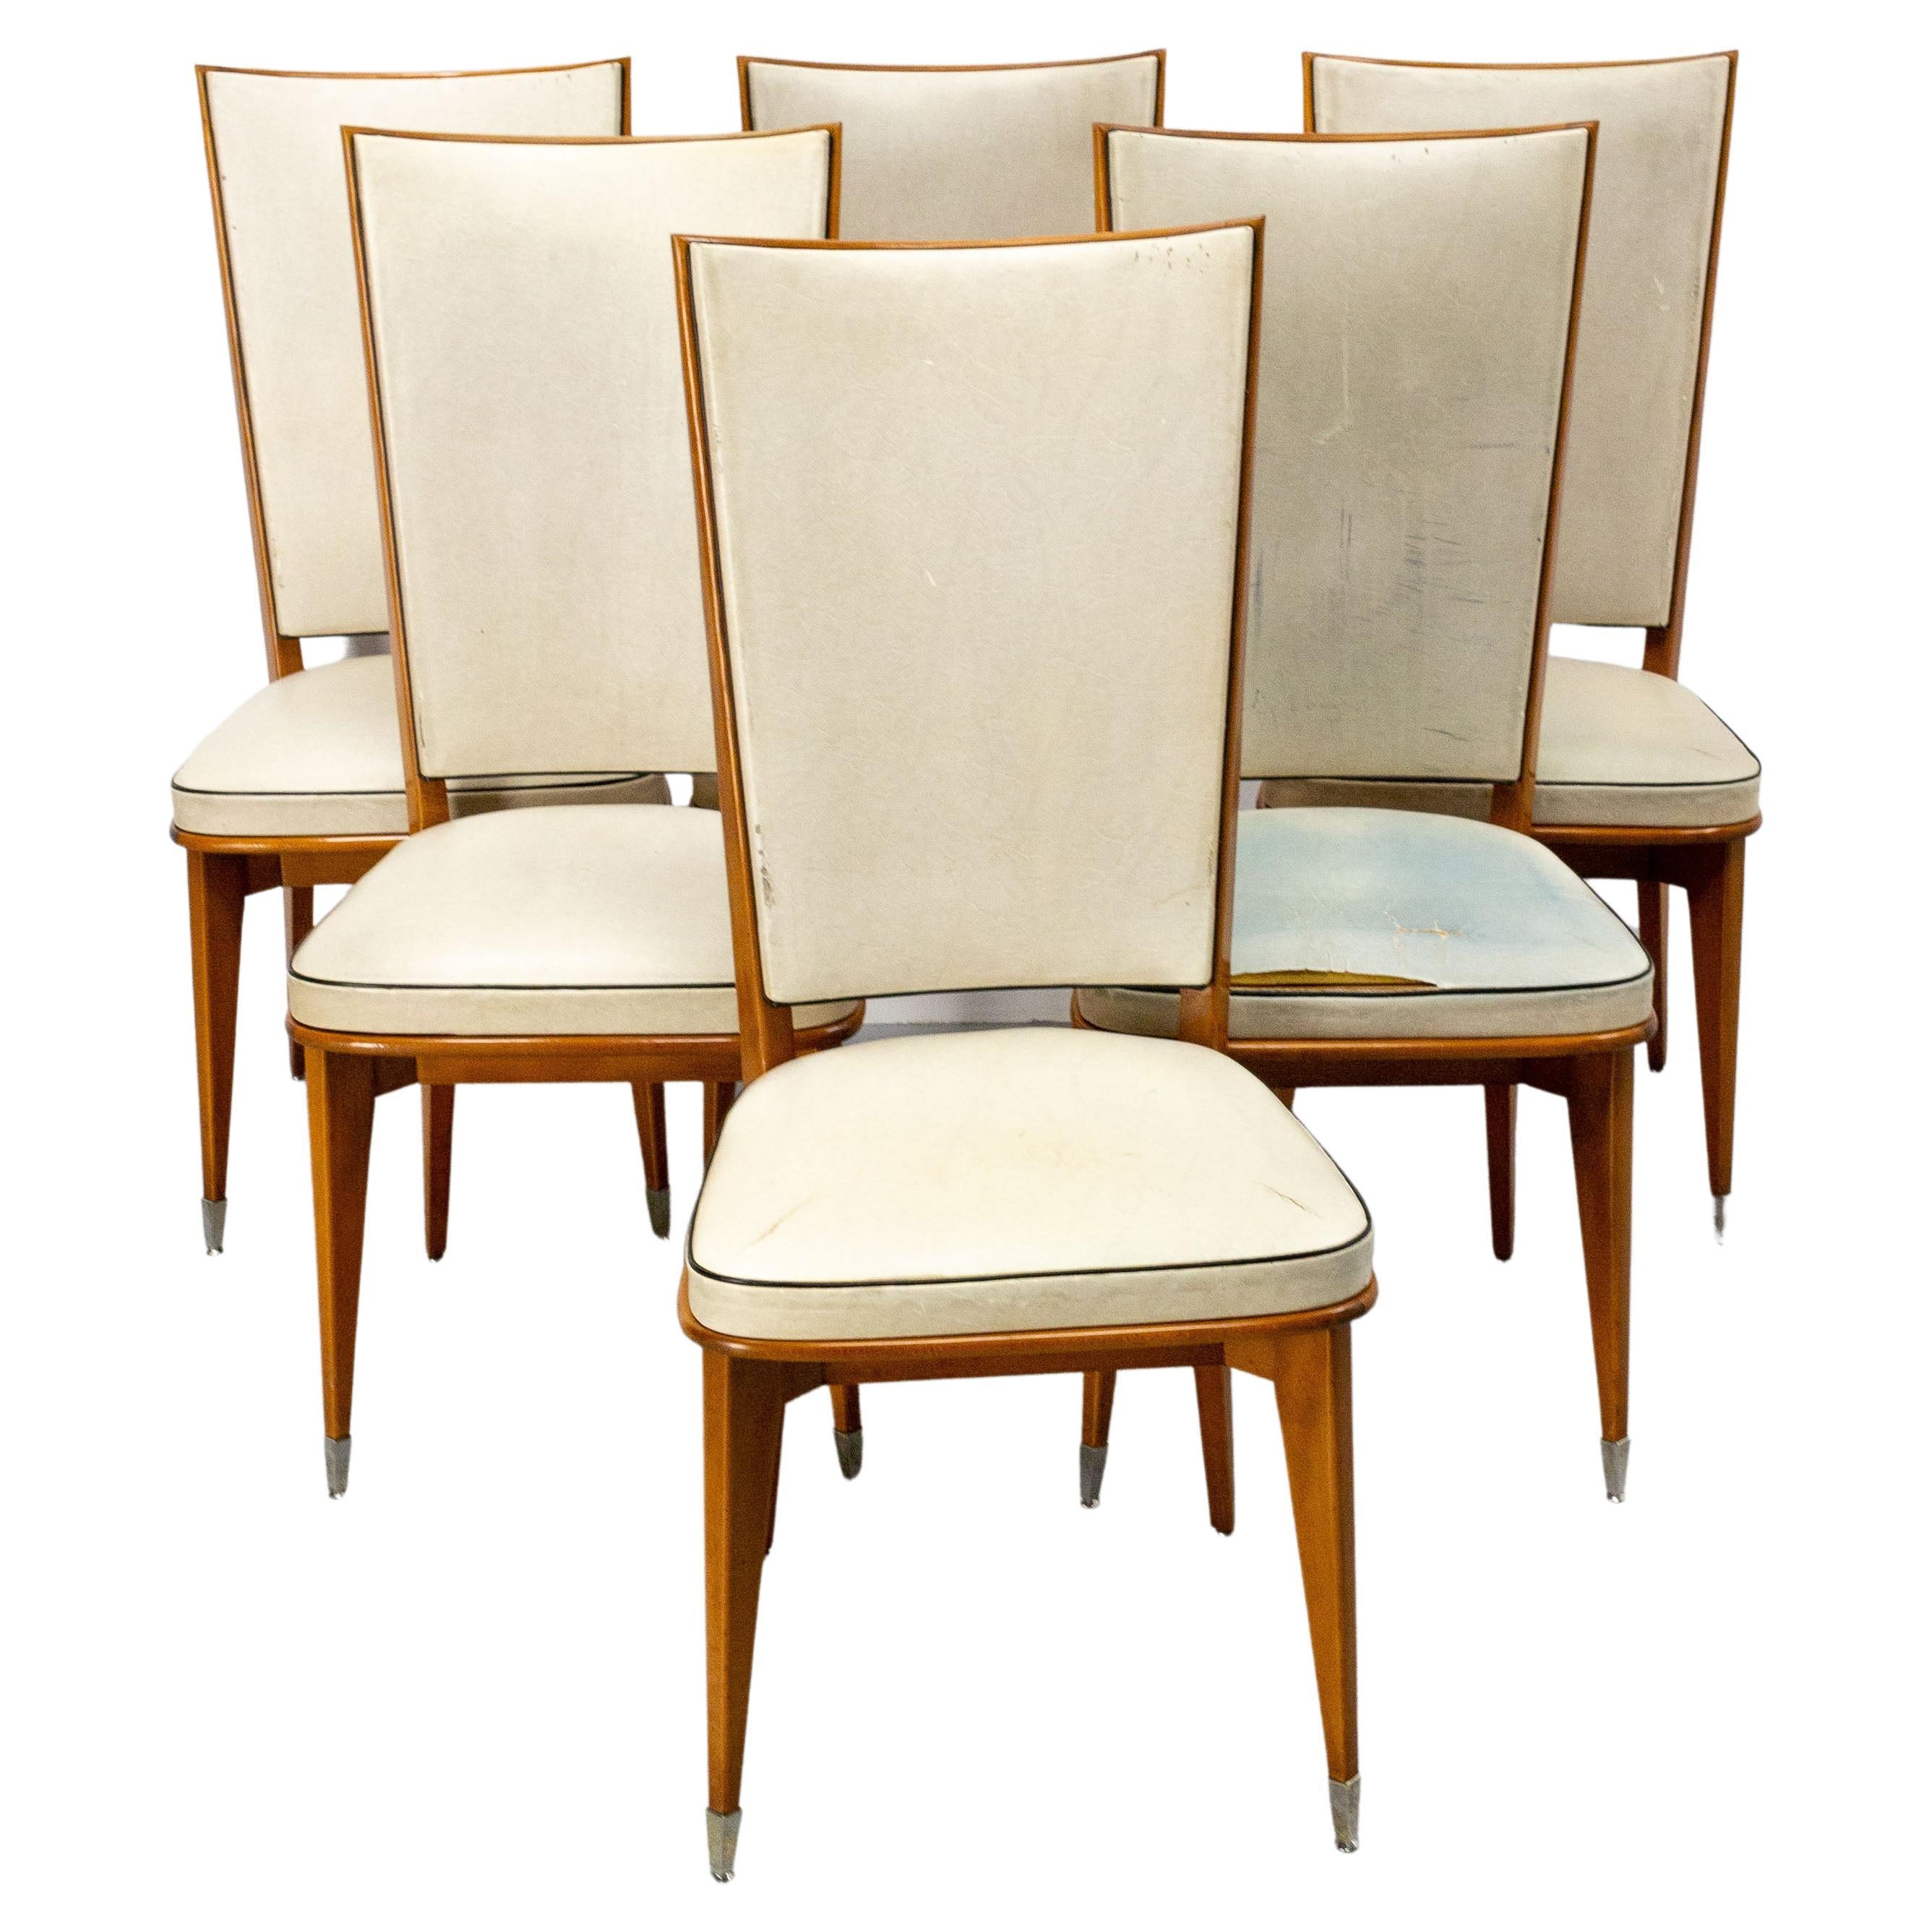 Six Dining Chairs Beech and Skai to Recover Midcentury French, circa 1950 For Sale